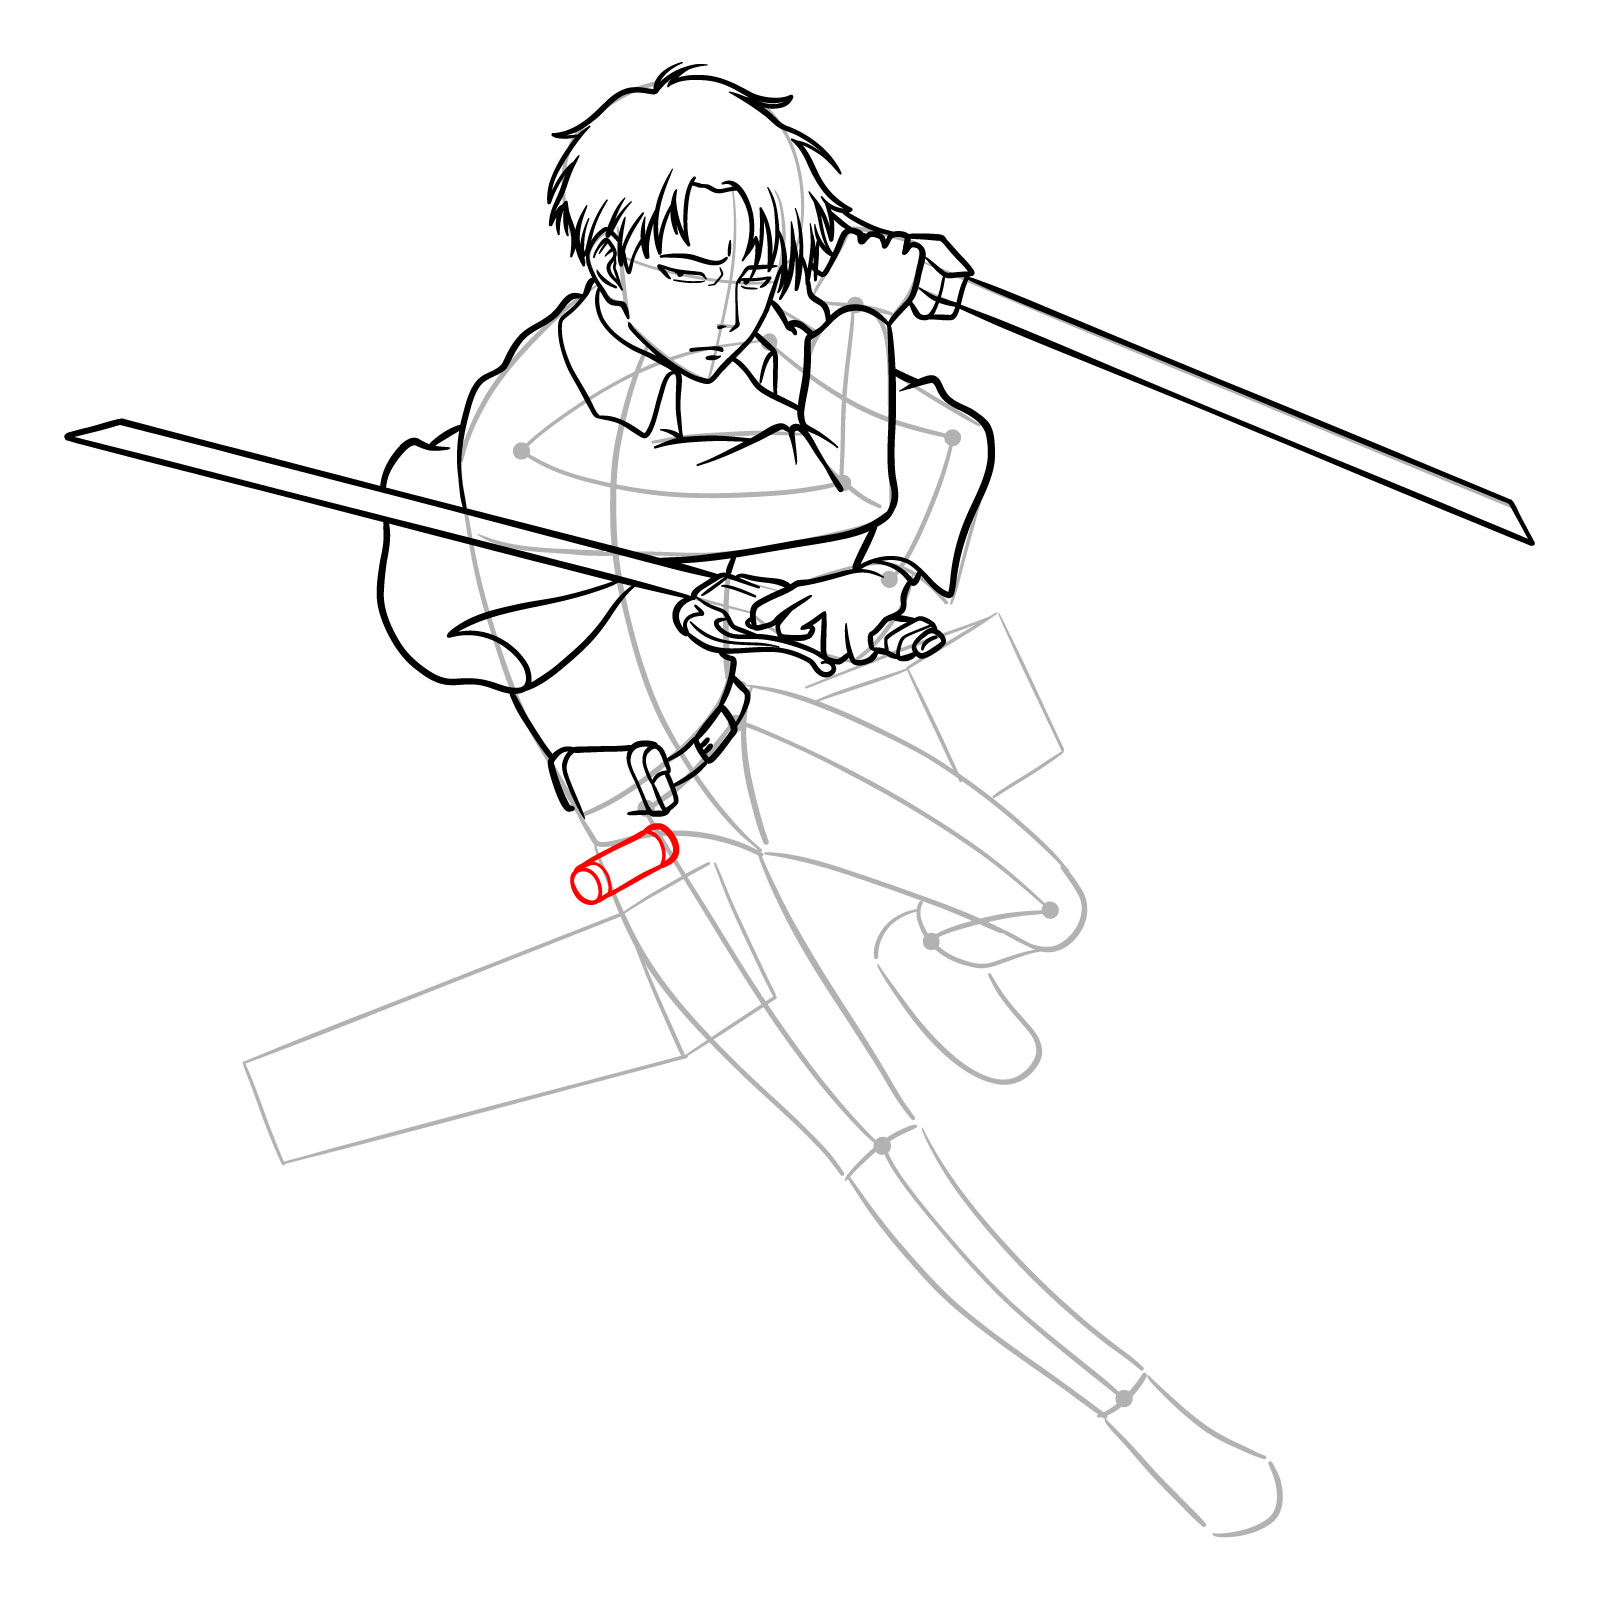 Sequential drawing steps for Captain Levi's ODM gear in an action pose - step 19